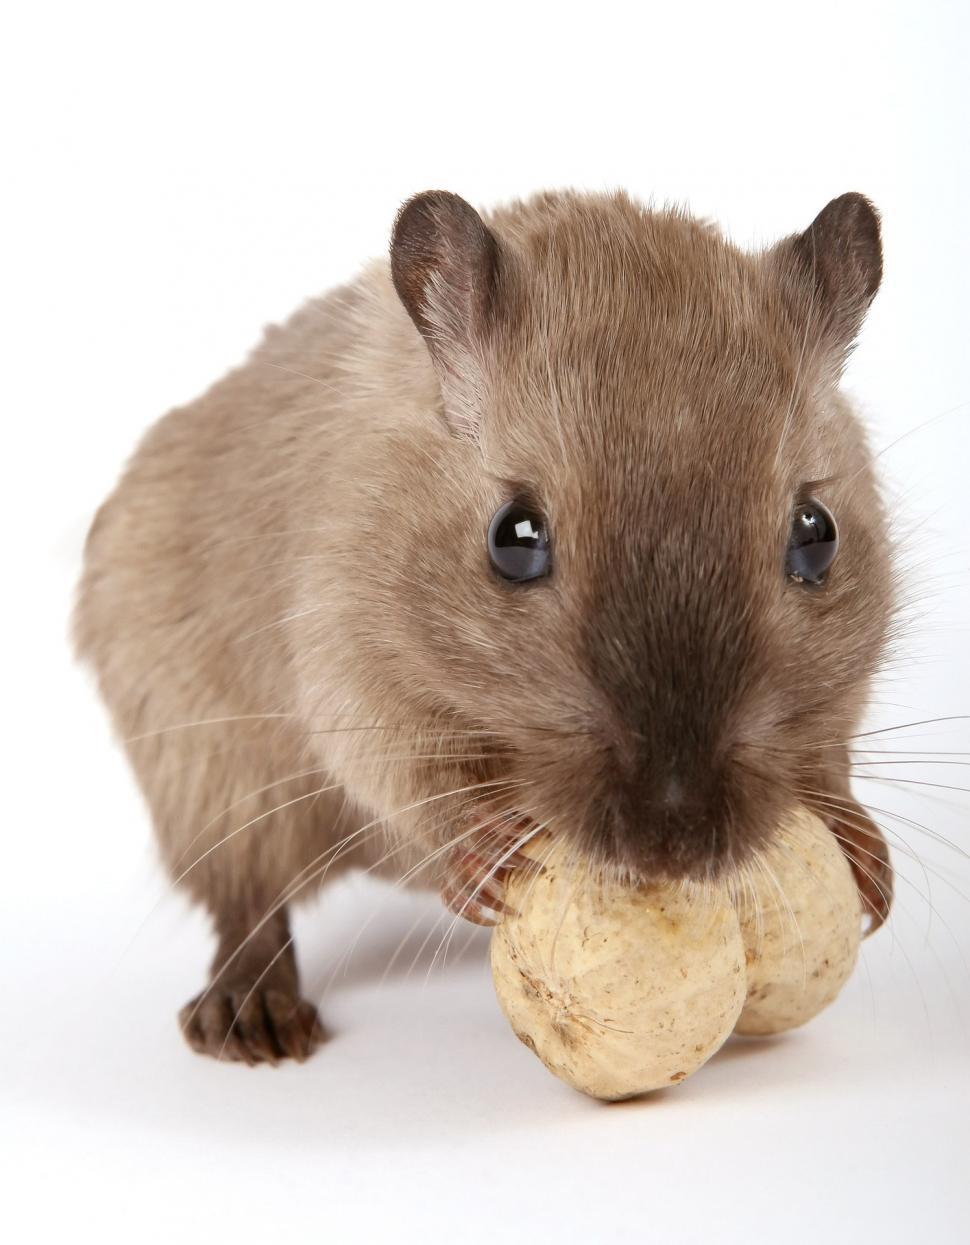 Free Image of Rodent Eating Piece of Food on White Background 